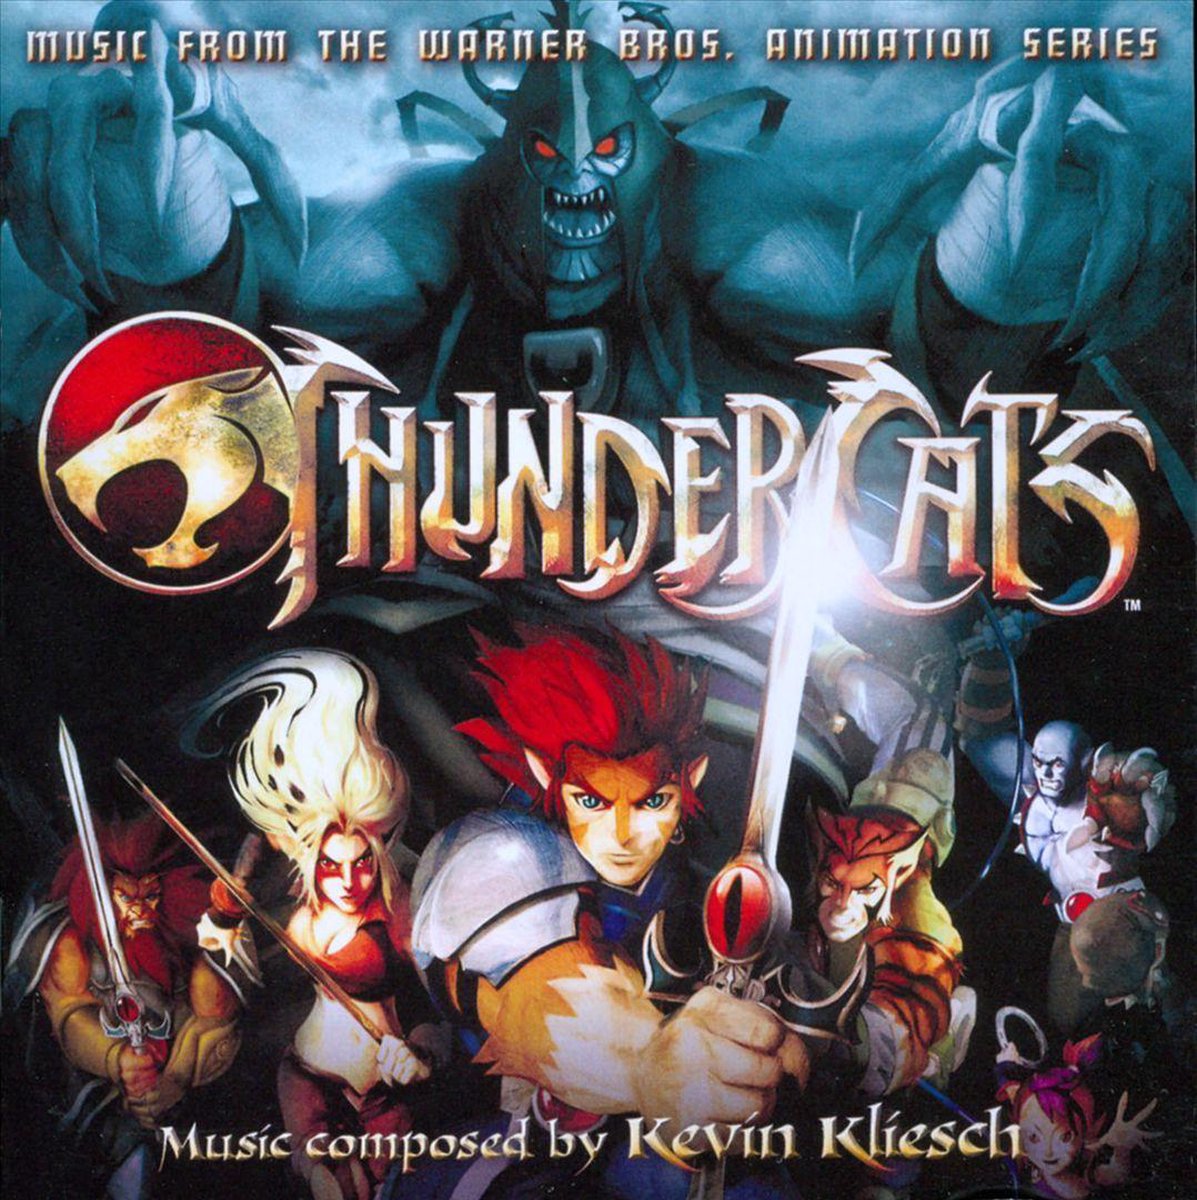 ThunderCats [Music from the Animated Series] - Kevin Kleisch